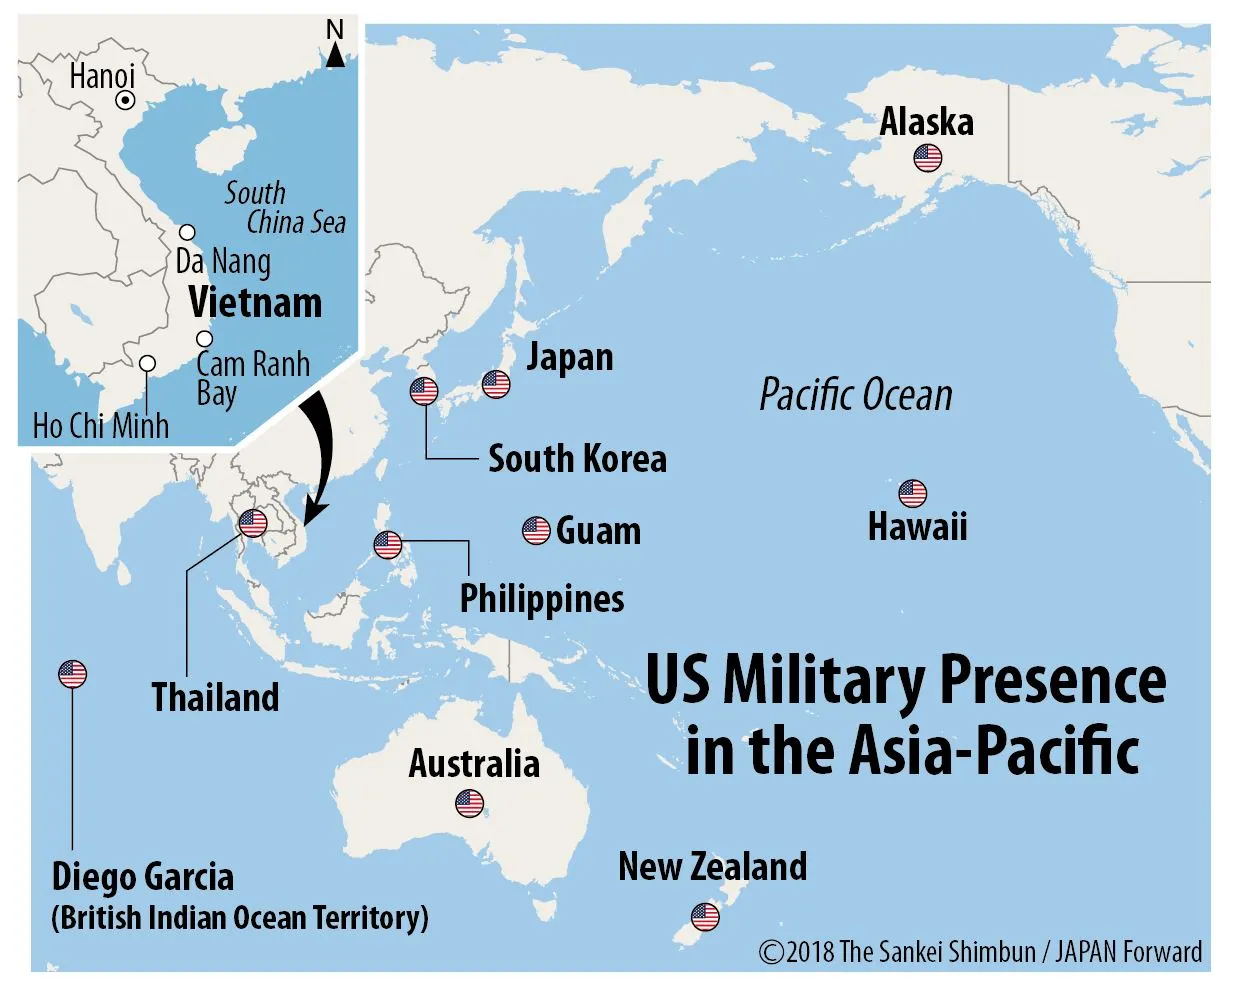 Escalating Military Alliances in the Asia-Pacific. (Photo internet reproduction)